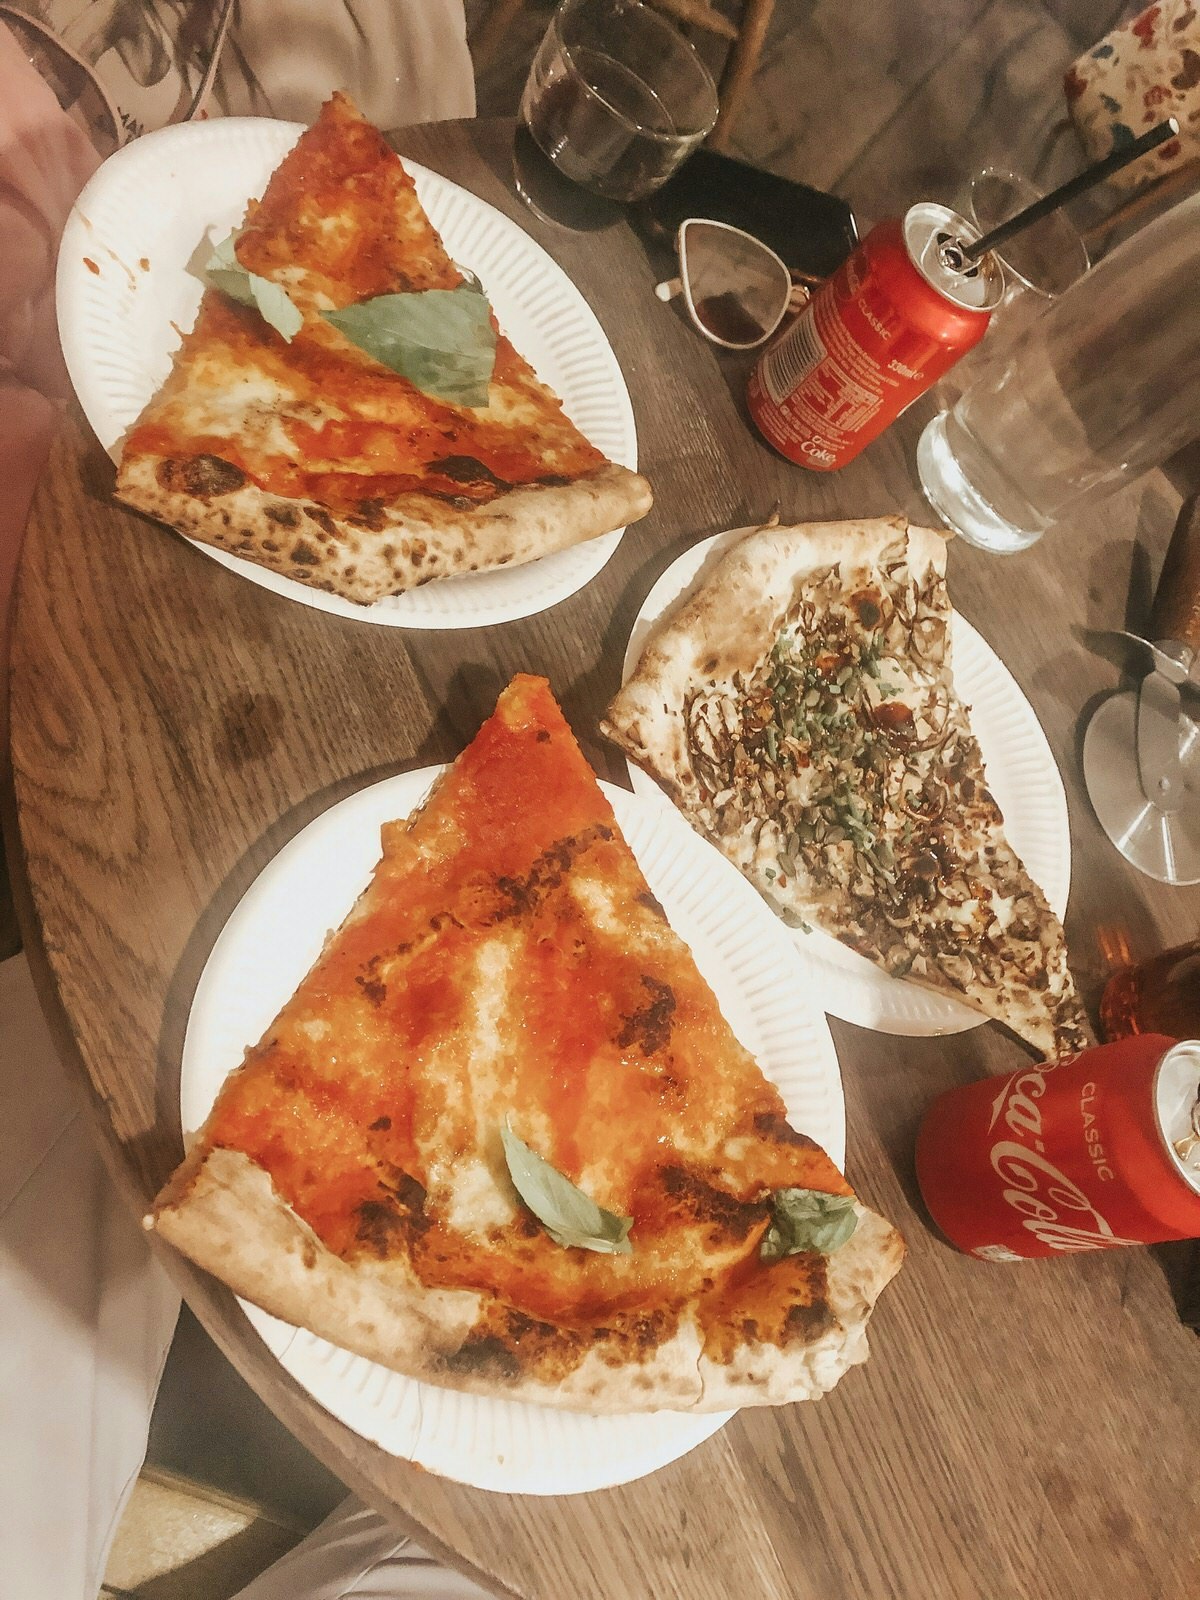 Three large slices of pizza on a wooden table at Homeslice restaurant 